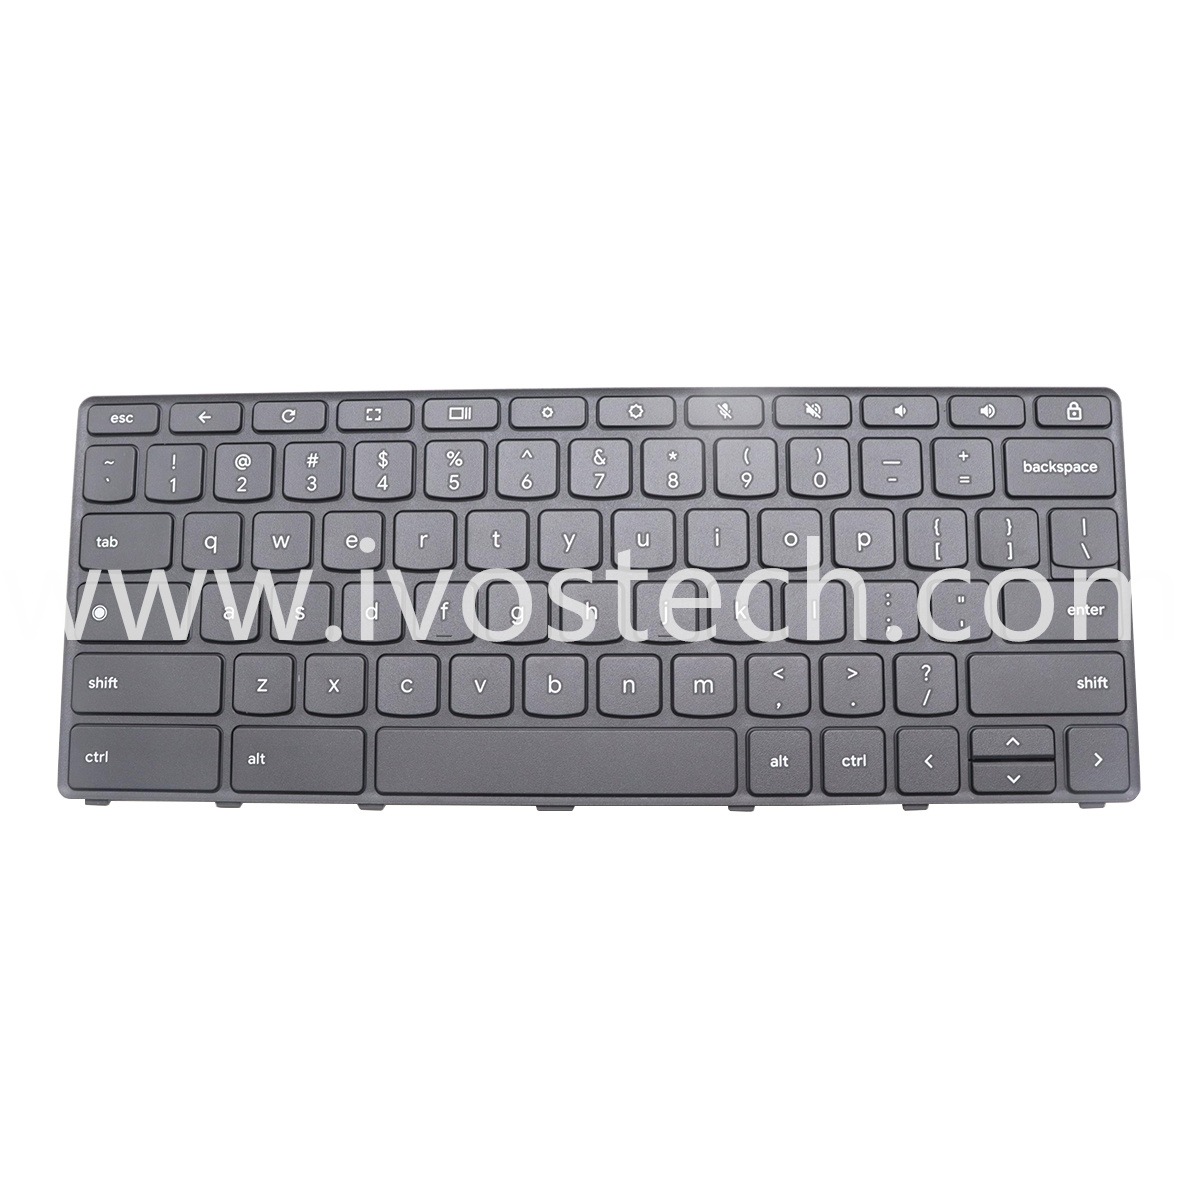 5N21L44038 Laptop Replacement Keyboard US Layout for Lenovo 500e Yoga Chromebook Gen 4 82W4 82W5